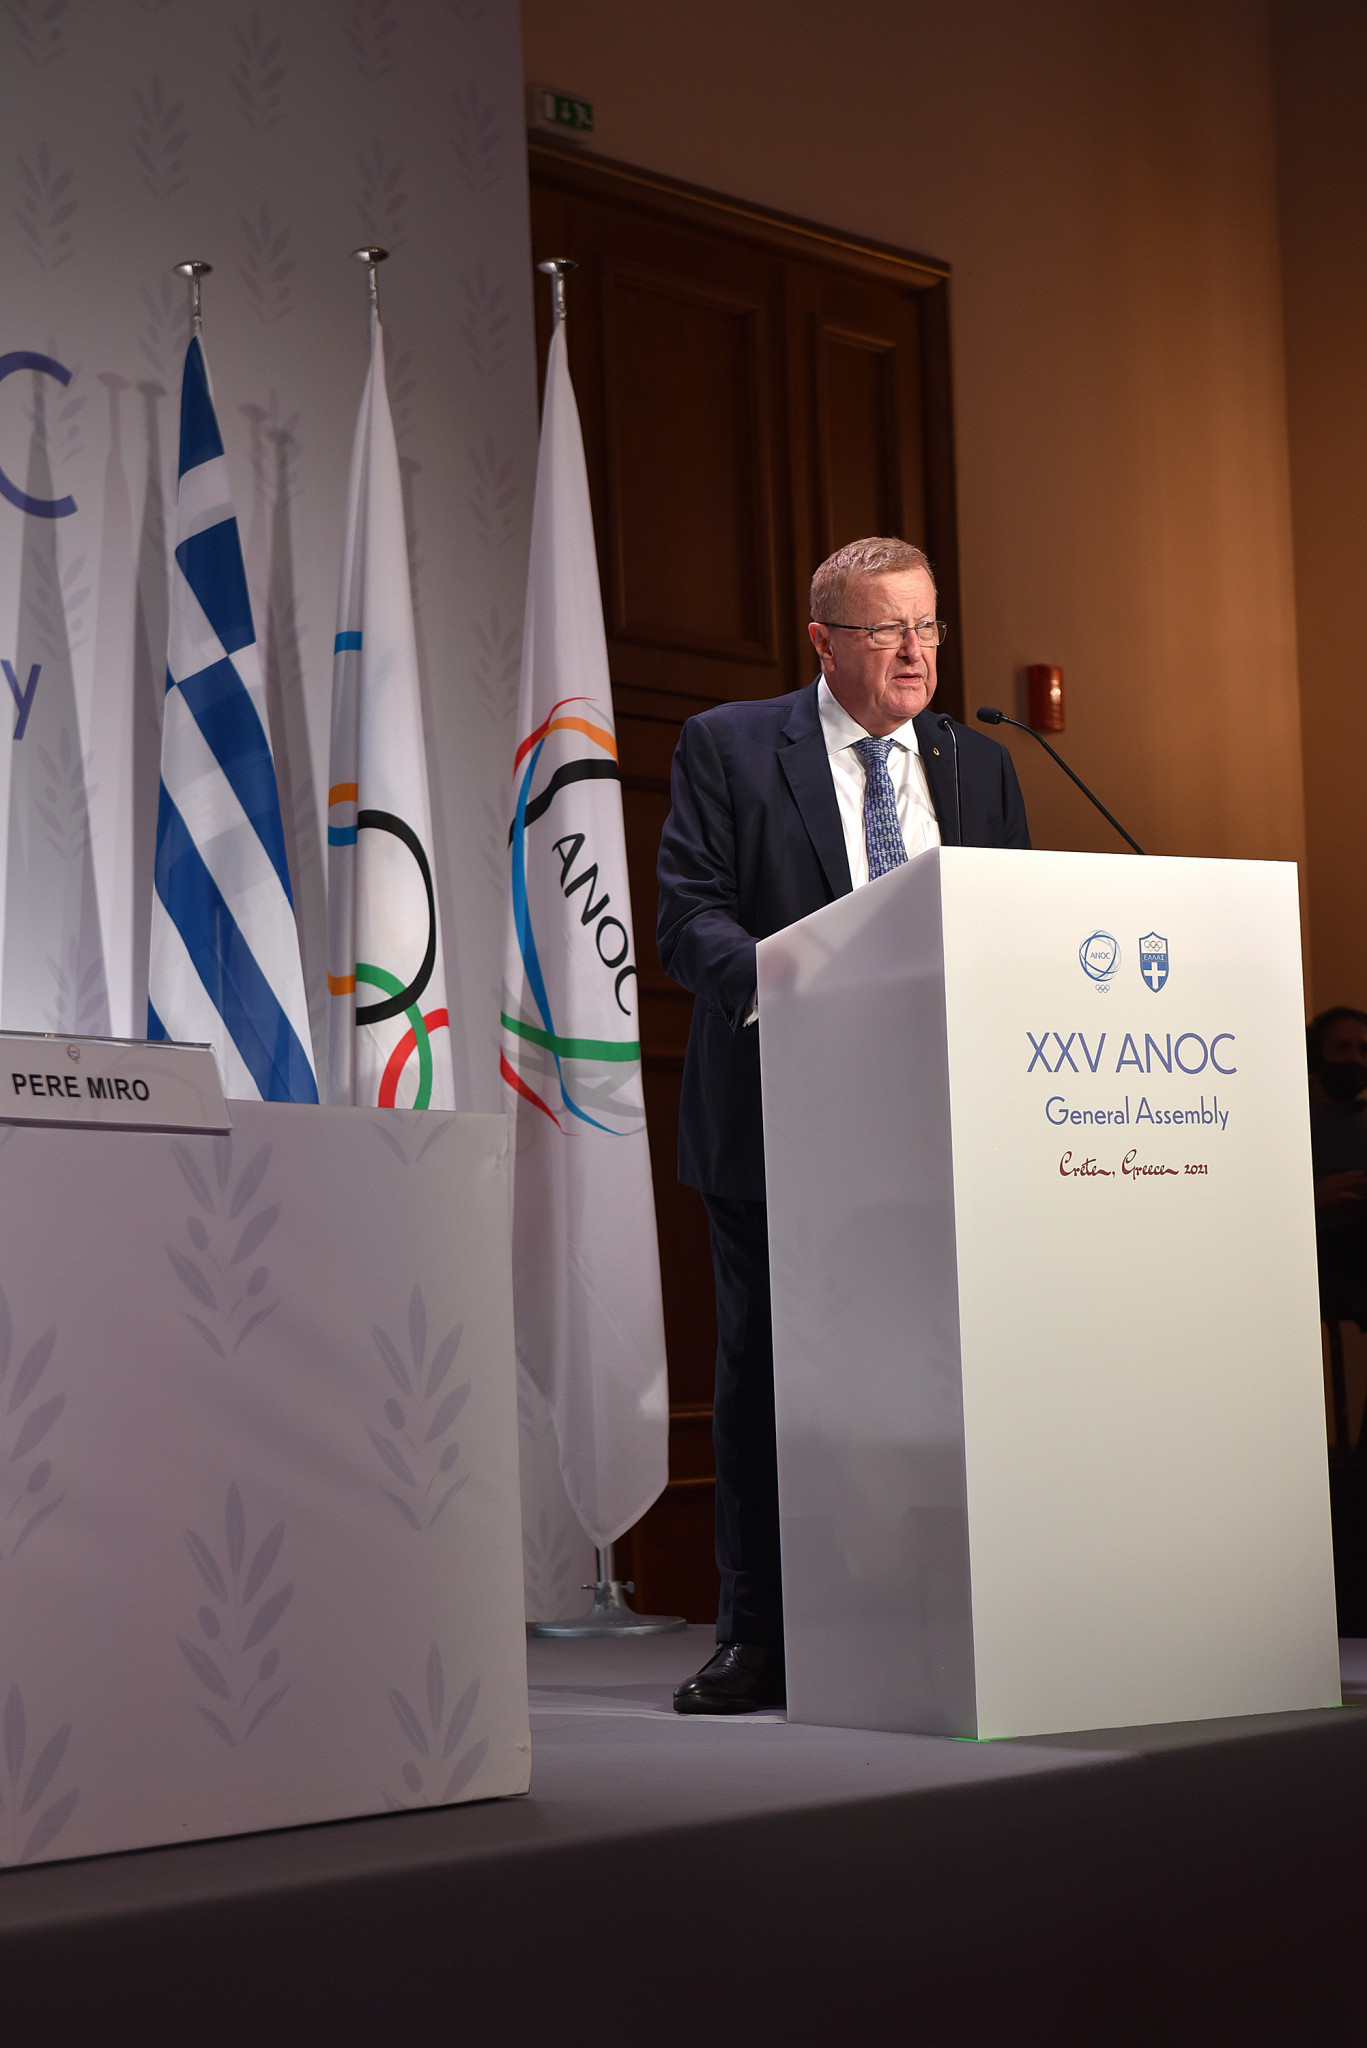 John Coates, who chaired the IOC Coordination Commission for Tokyo 2020, praised Japanese organisers for being gracious hosts of the Games ©ANOC